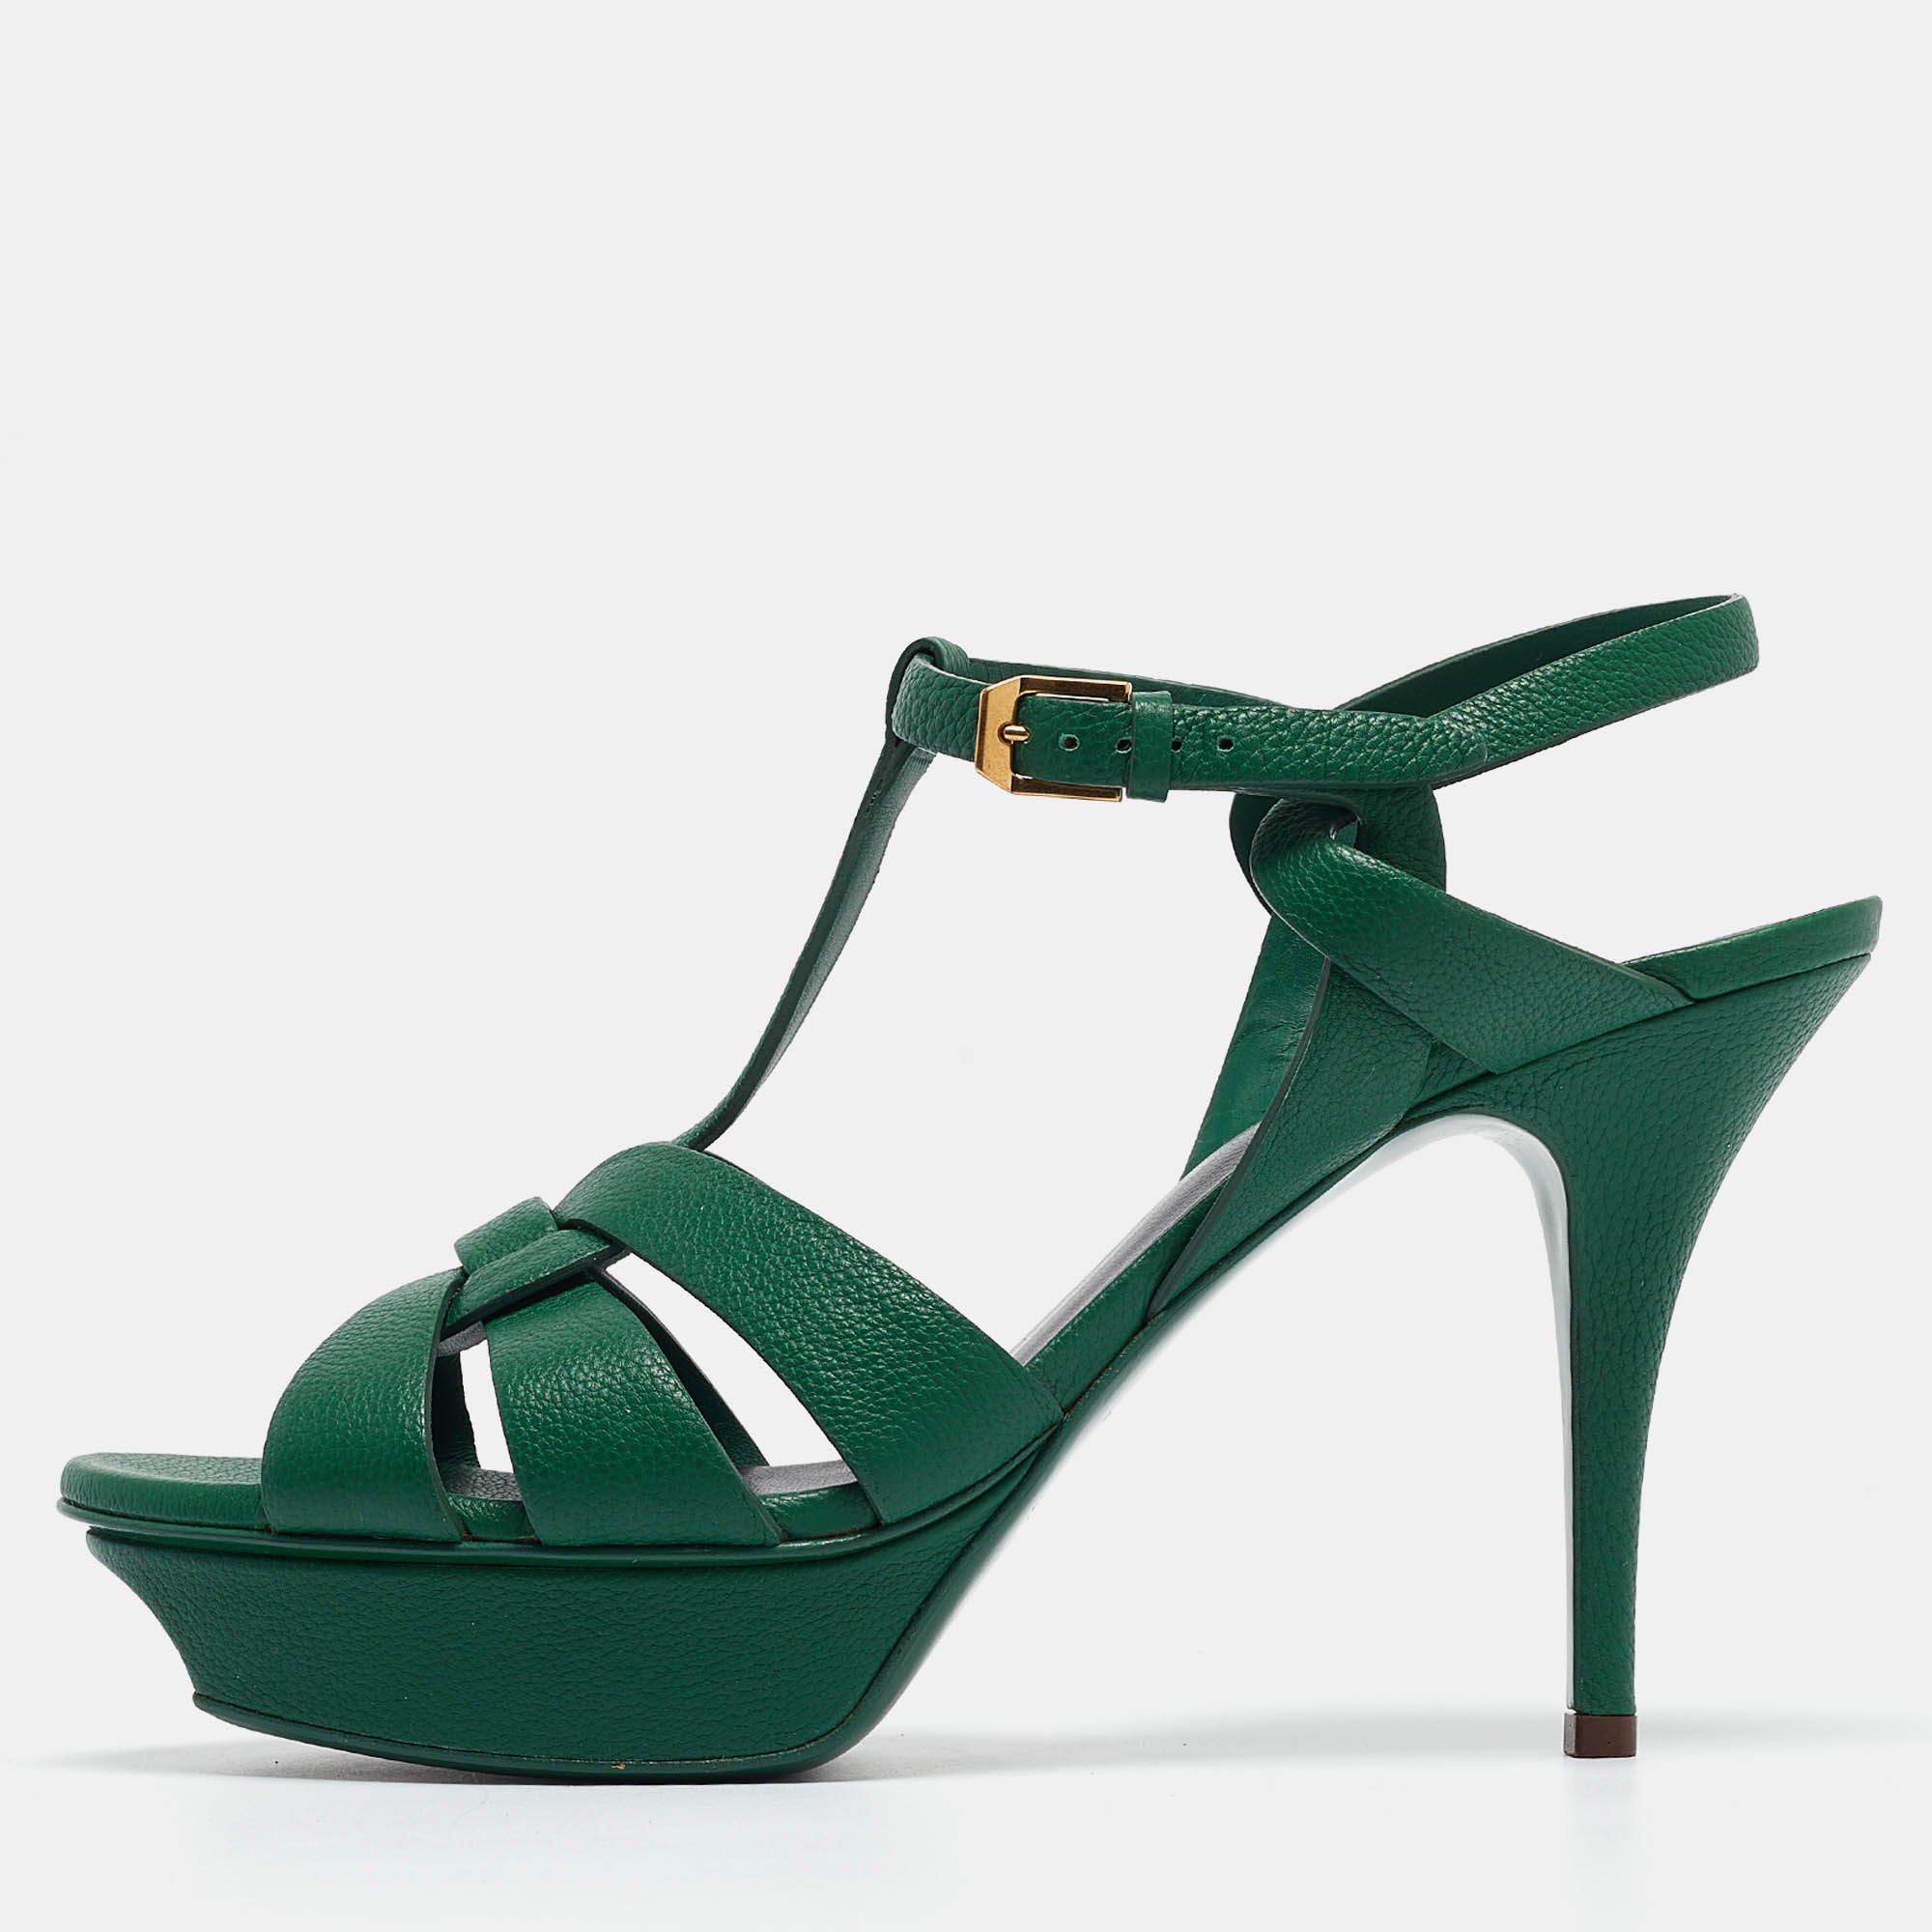 Yves saint laurent green leather tribute sandals size 40